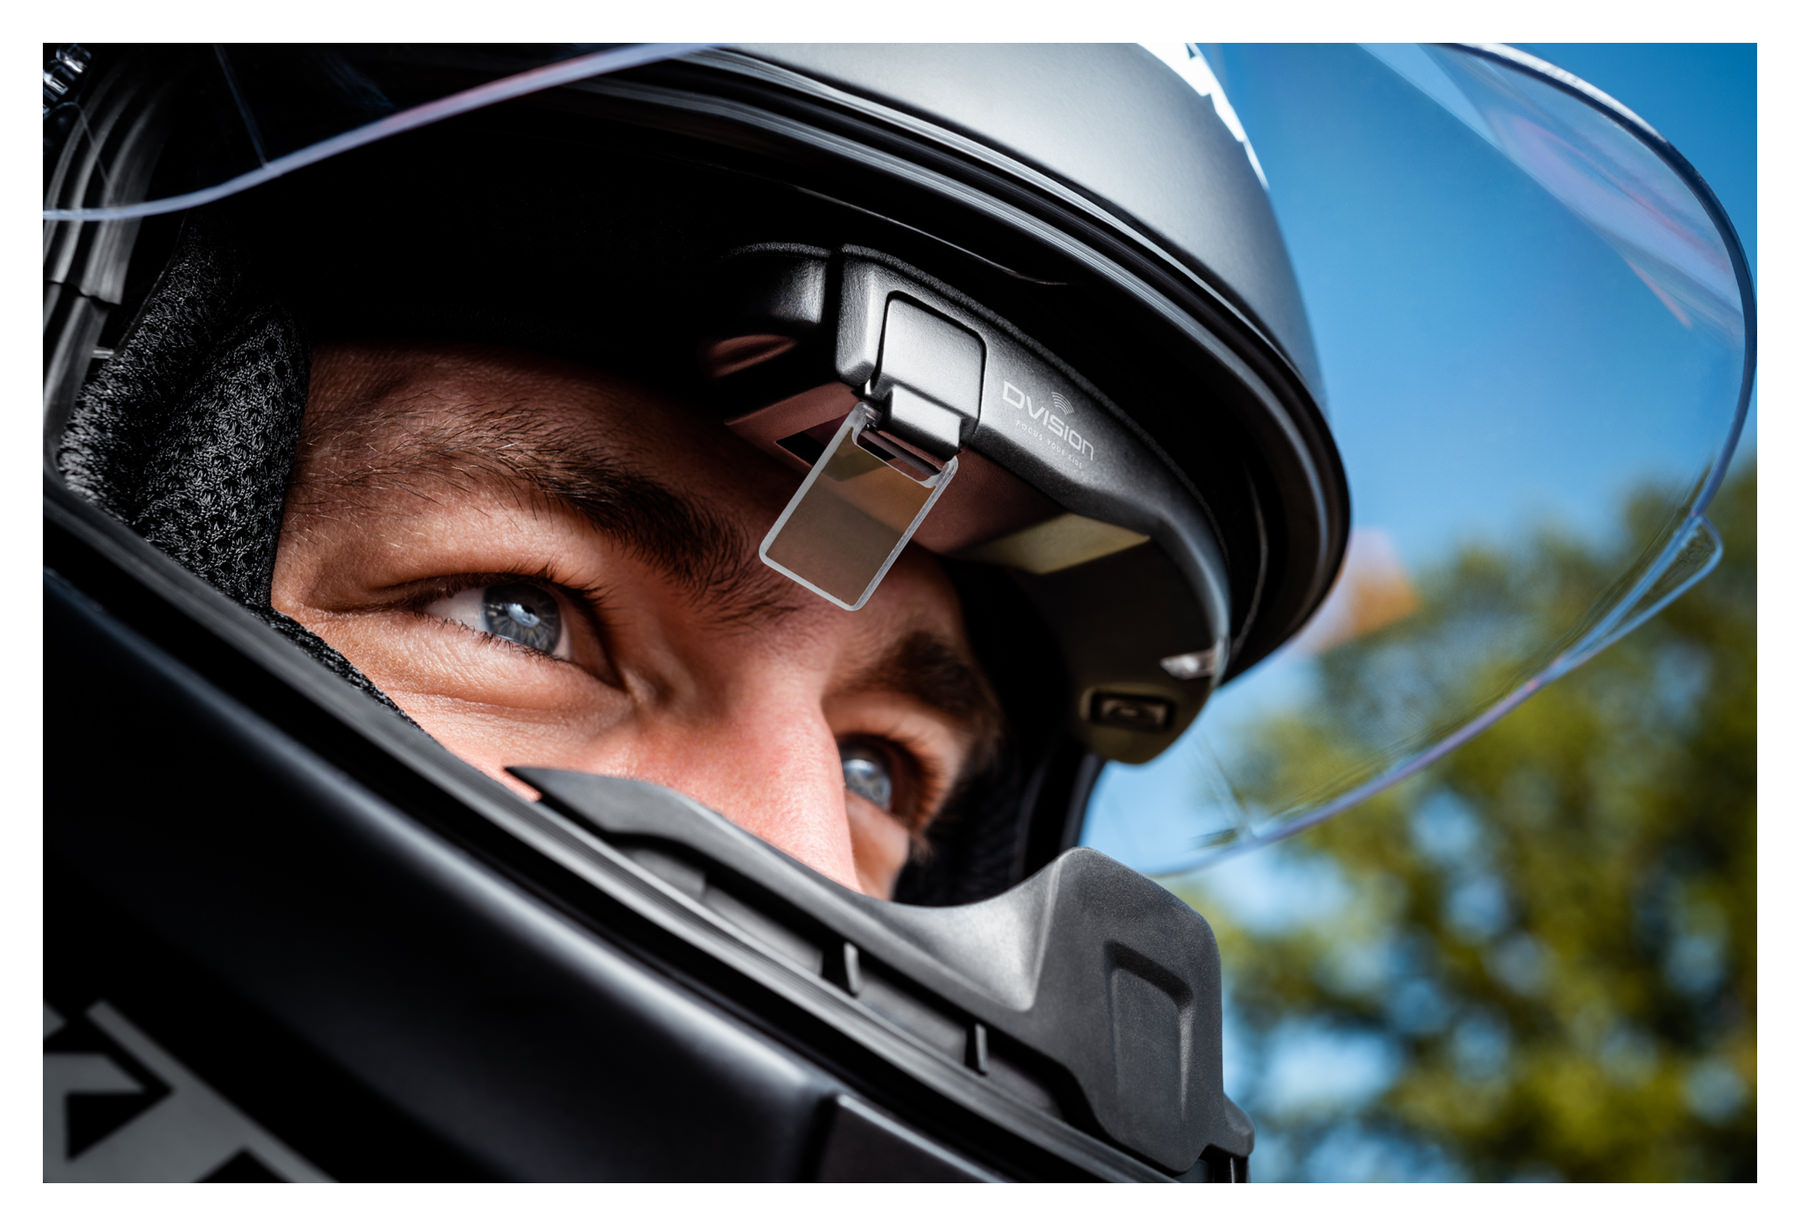 Buy DVISION Head-Up Display for the motorbike helmet | Louis motorcycle  clothing and technology